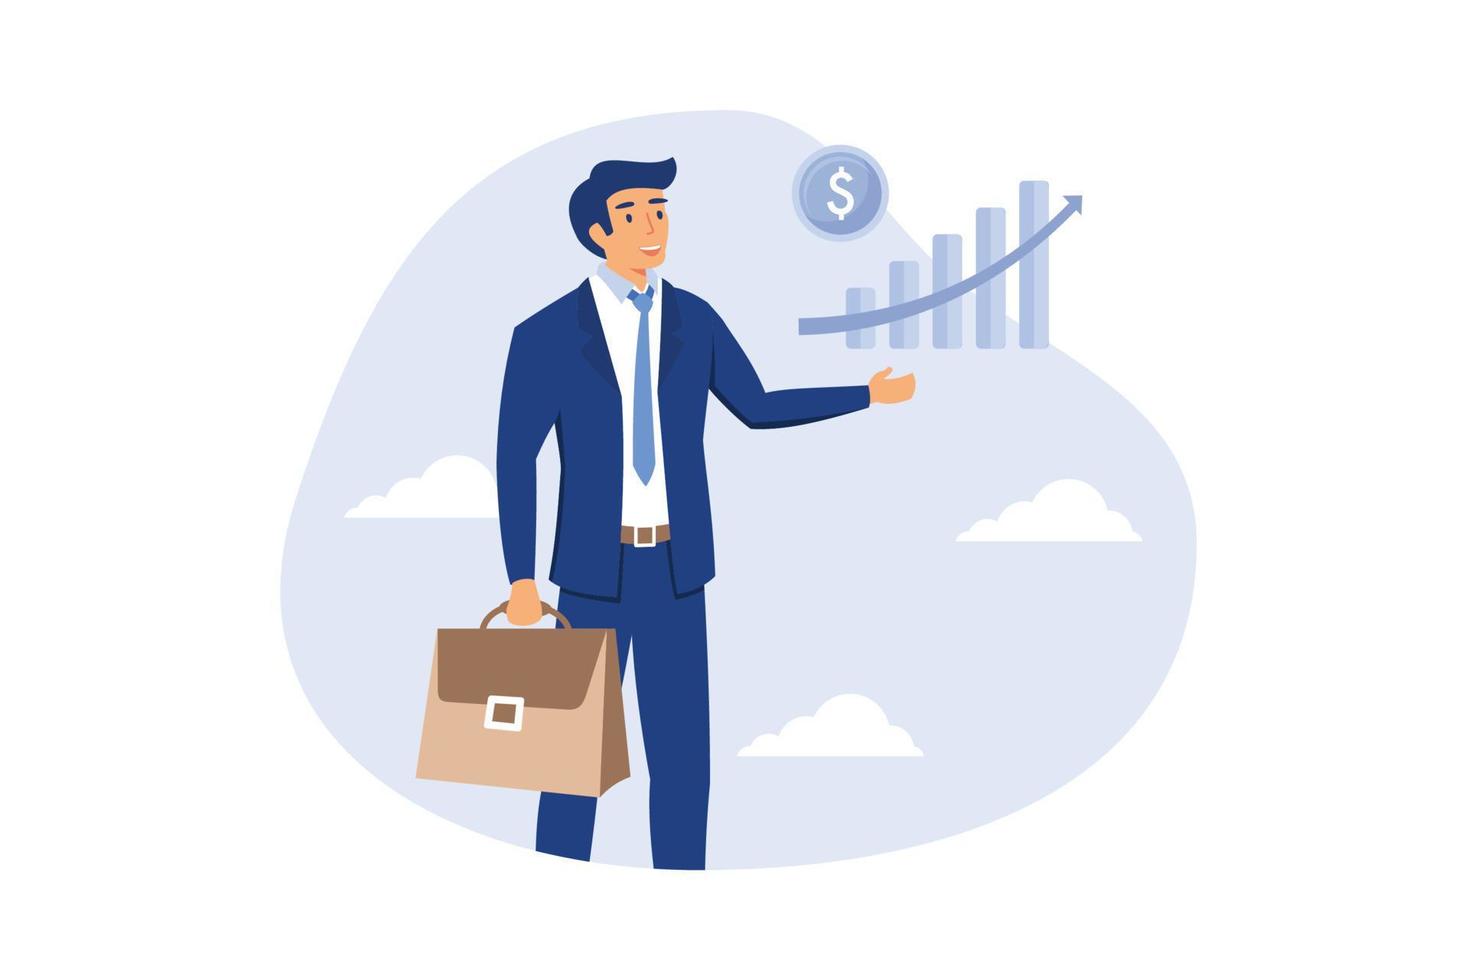 Investment profit growth, financial advisor or wealth management, make money to get rich or increase earning or income concept, confidence businessman investor holding big rising profit growth graph vector